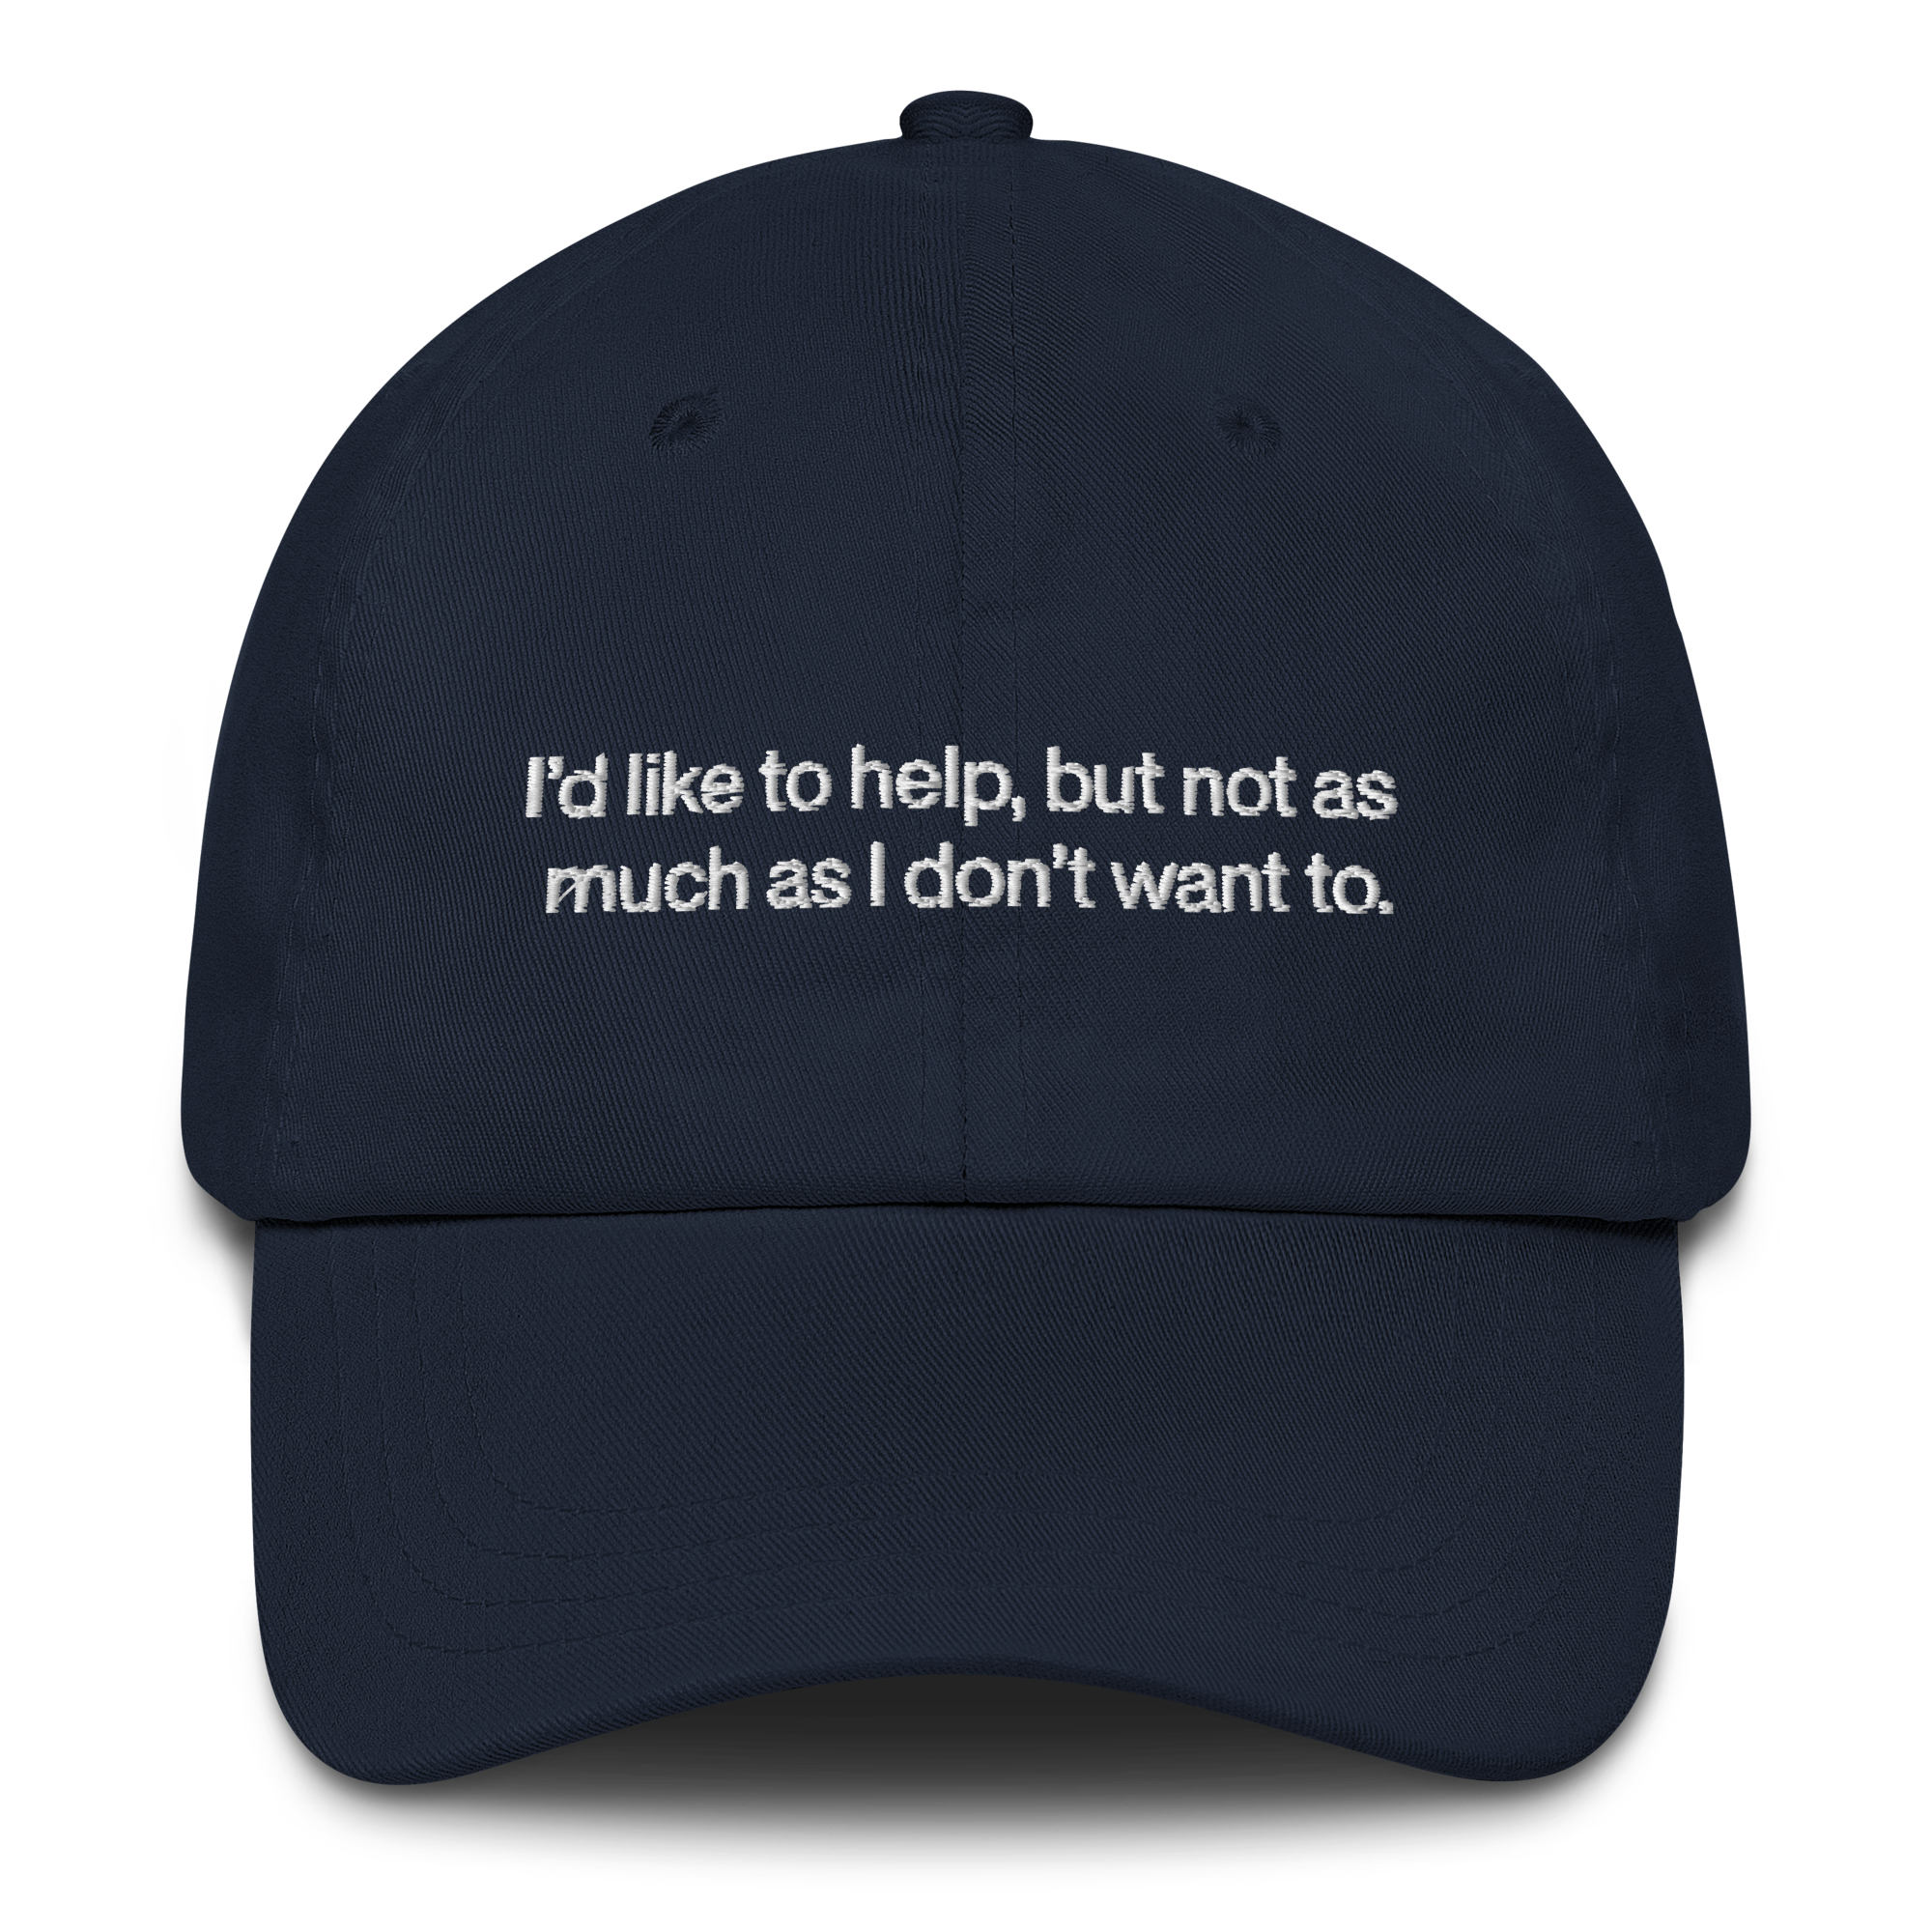 classic-dad-hat-navy-front-667b26d117117.png